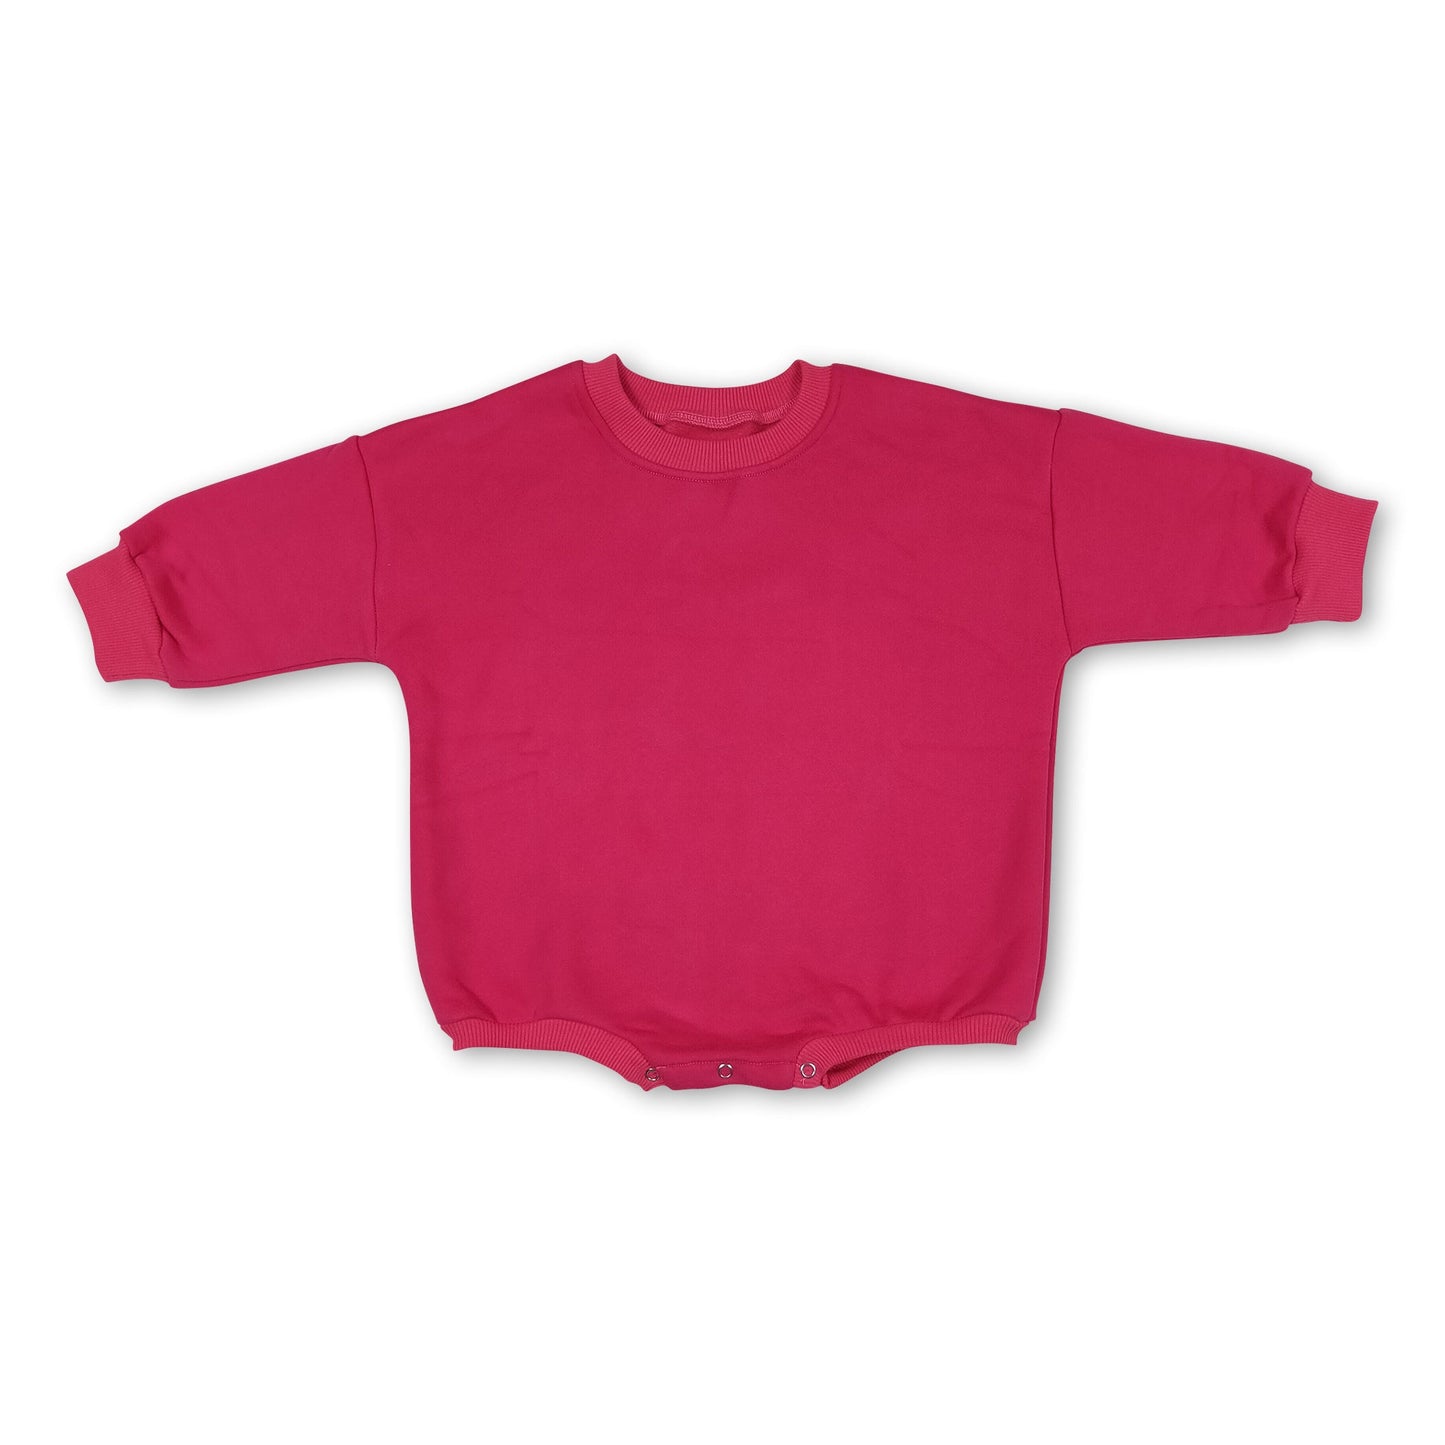 Hot pink cotton long sleeves baby sweat romper